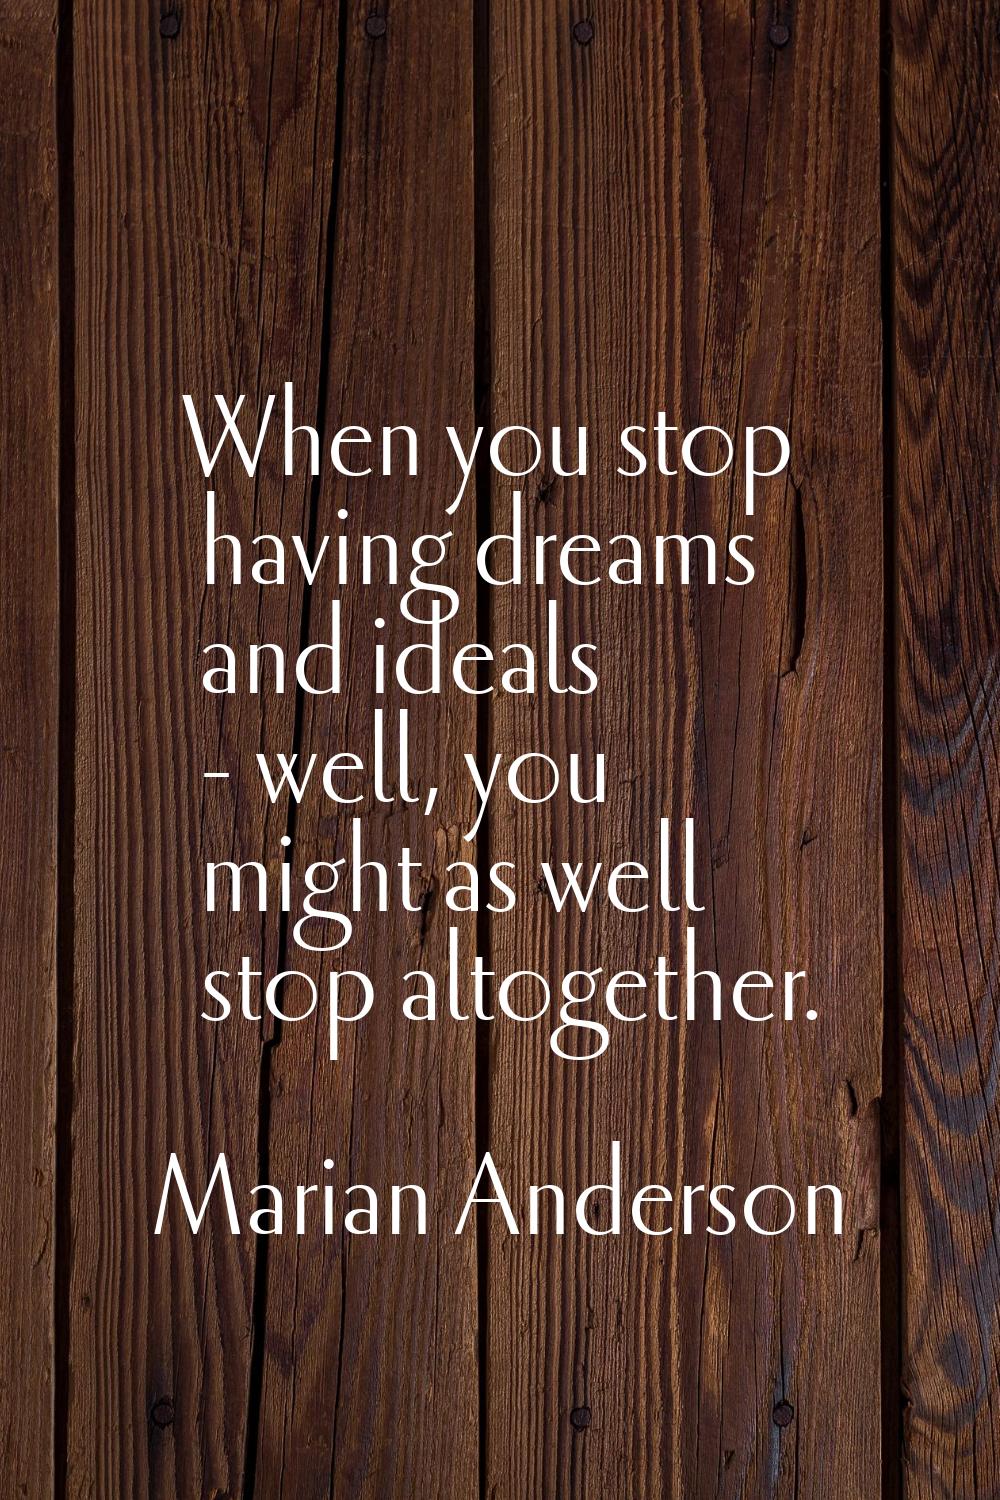 When you stop having dreams and ideals - well, you might as well stop altogether.